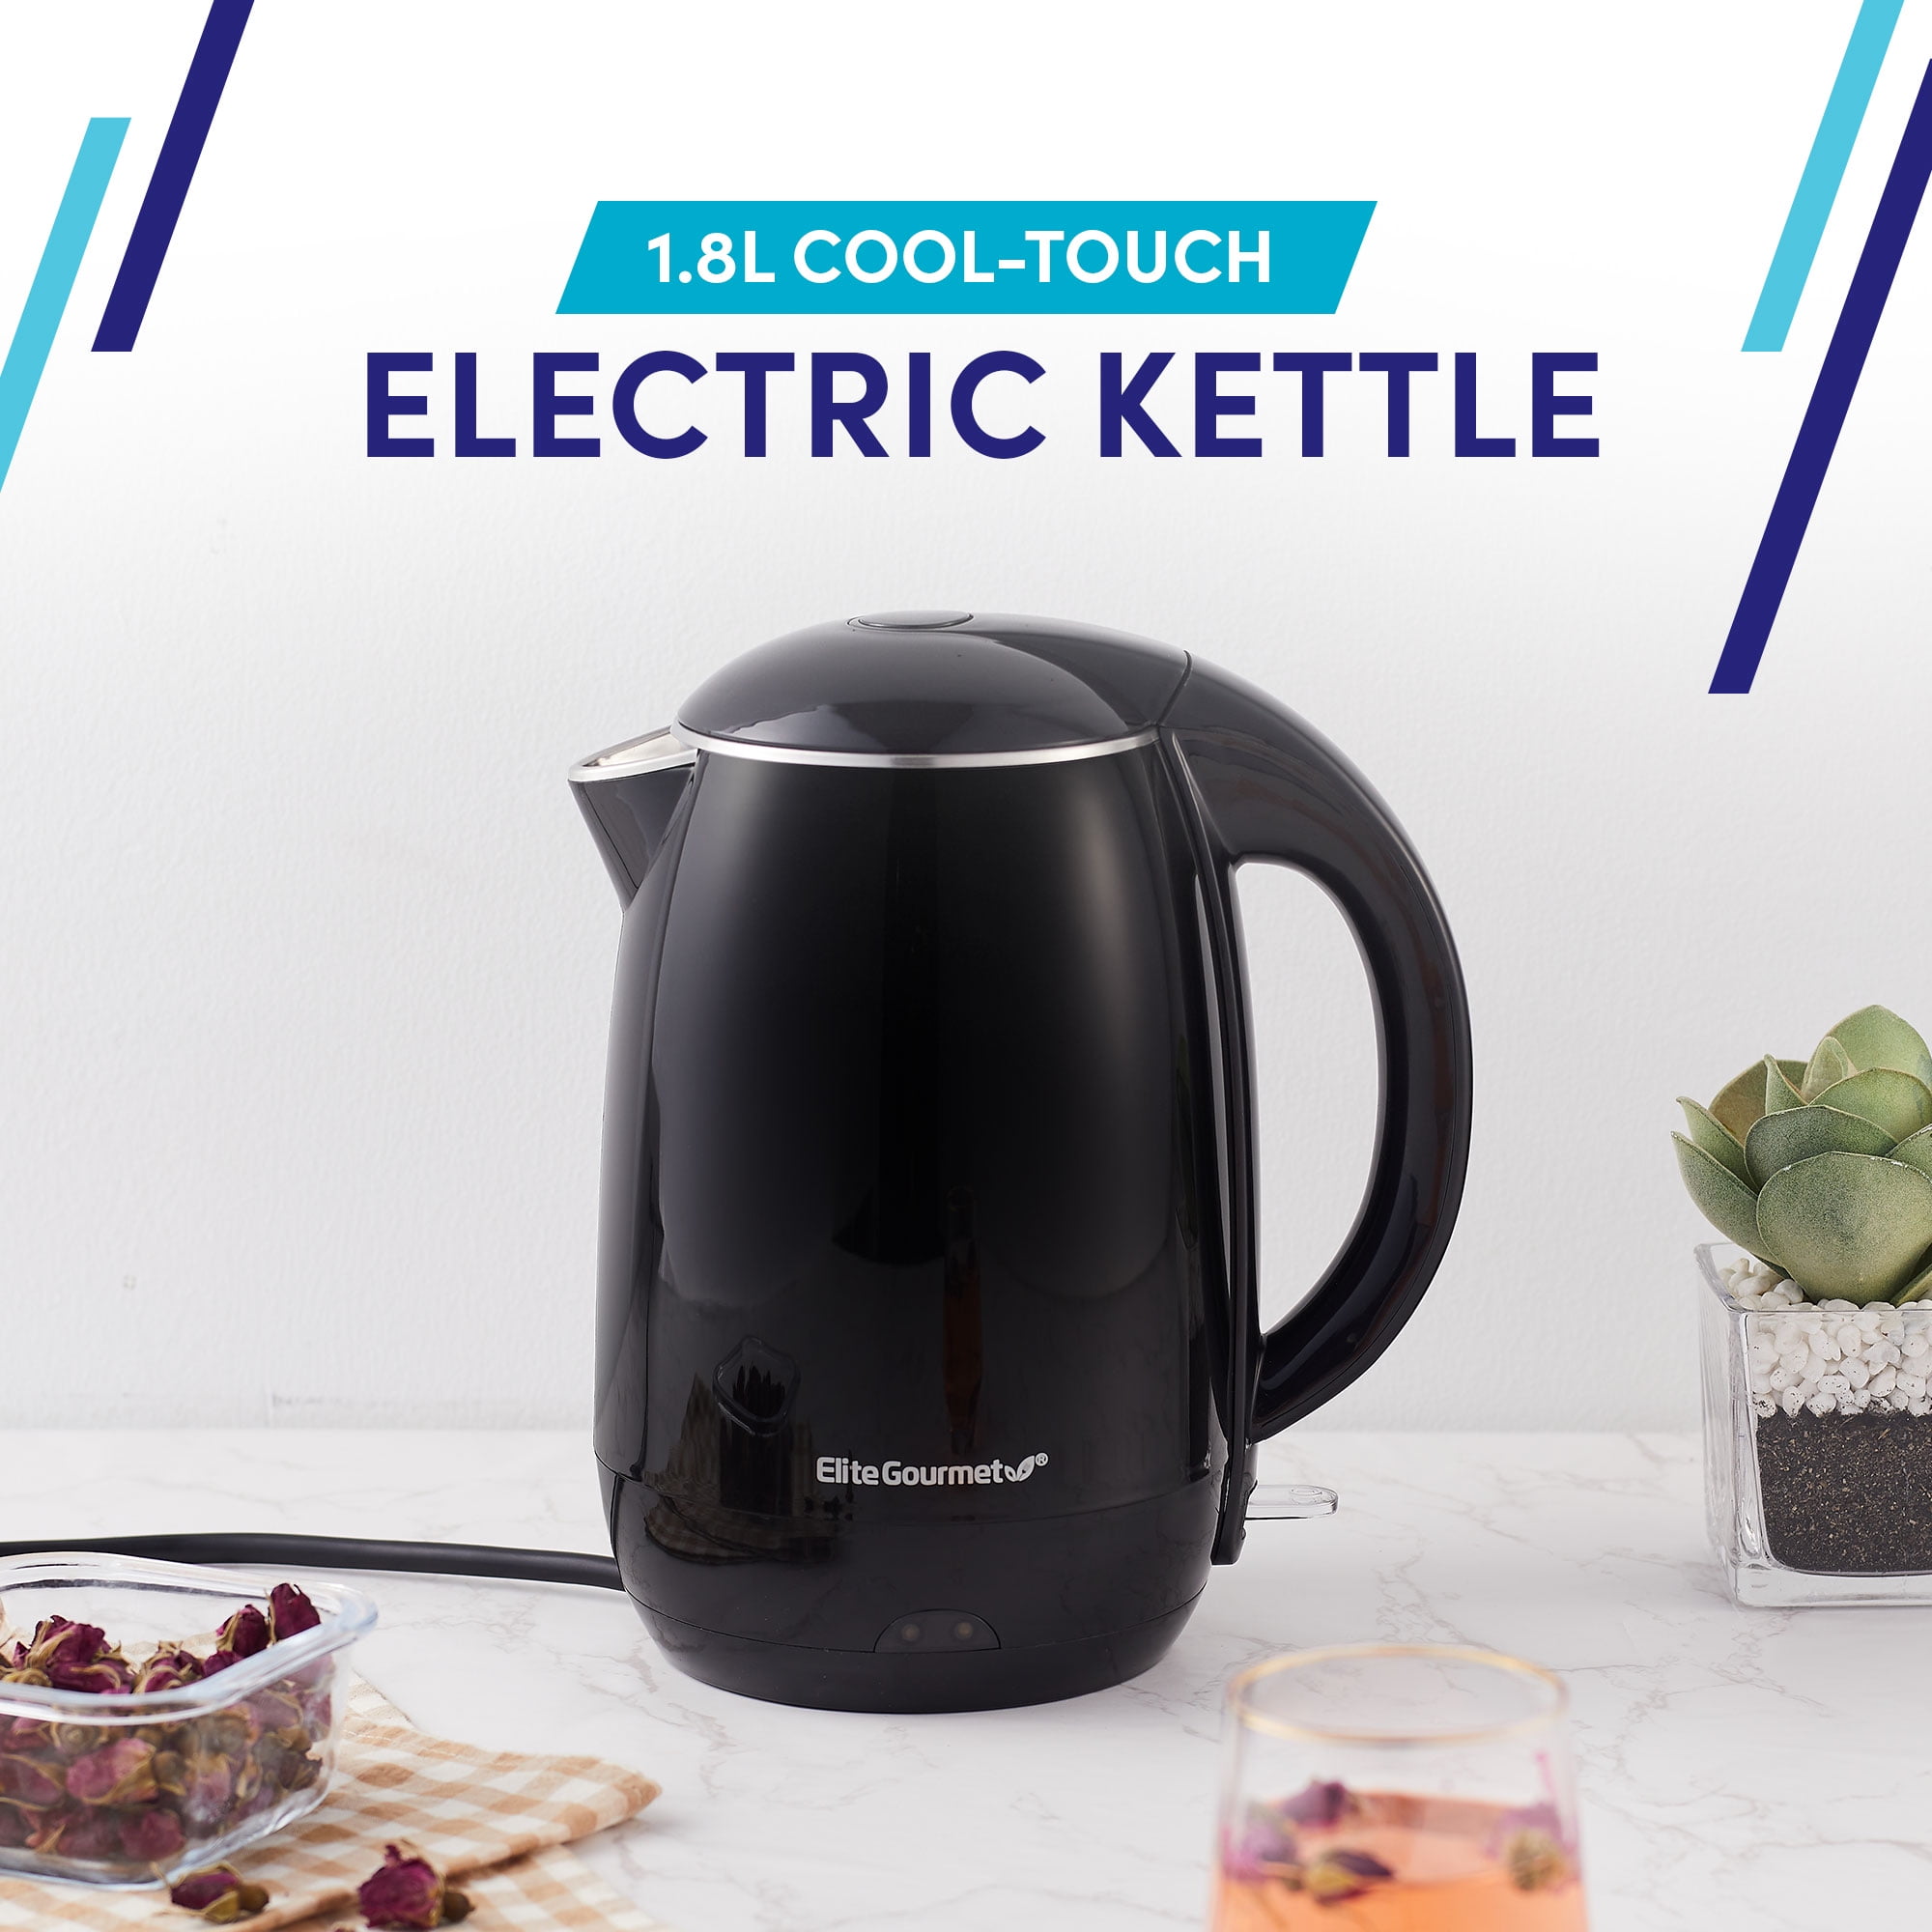 iTouch EKT1821 1.8L Double Wall Insulated Cool-Touch Electric Kettle with Stainless Steel Interior & Lid 360 Deg Swivel Base for Cord Free Serving Bla